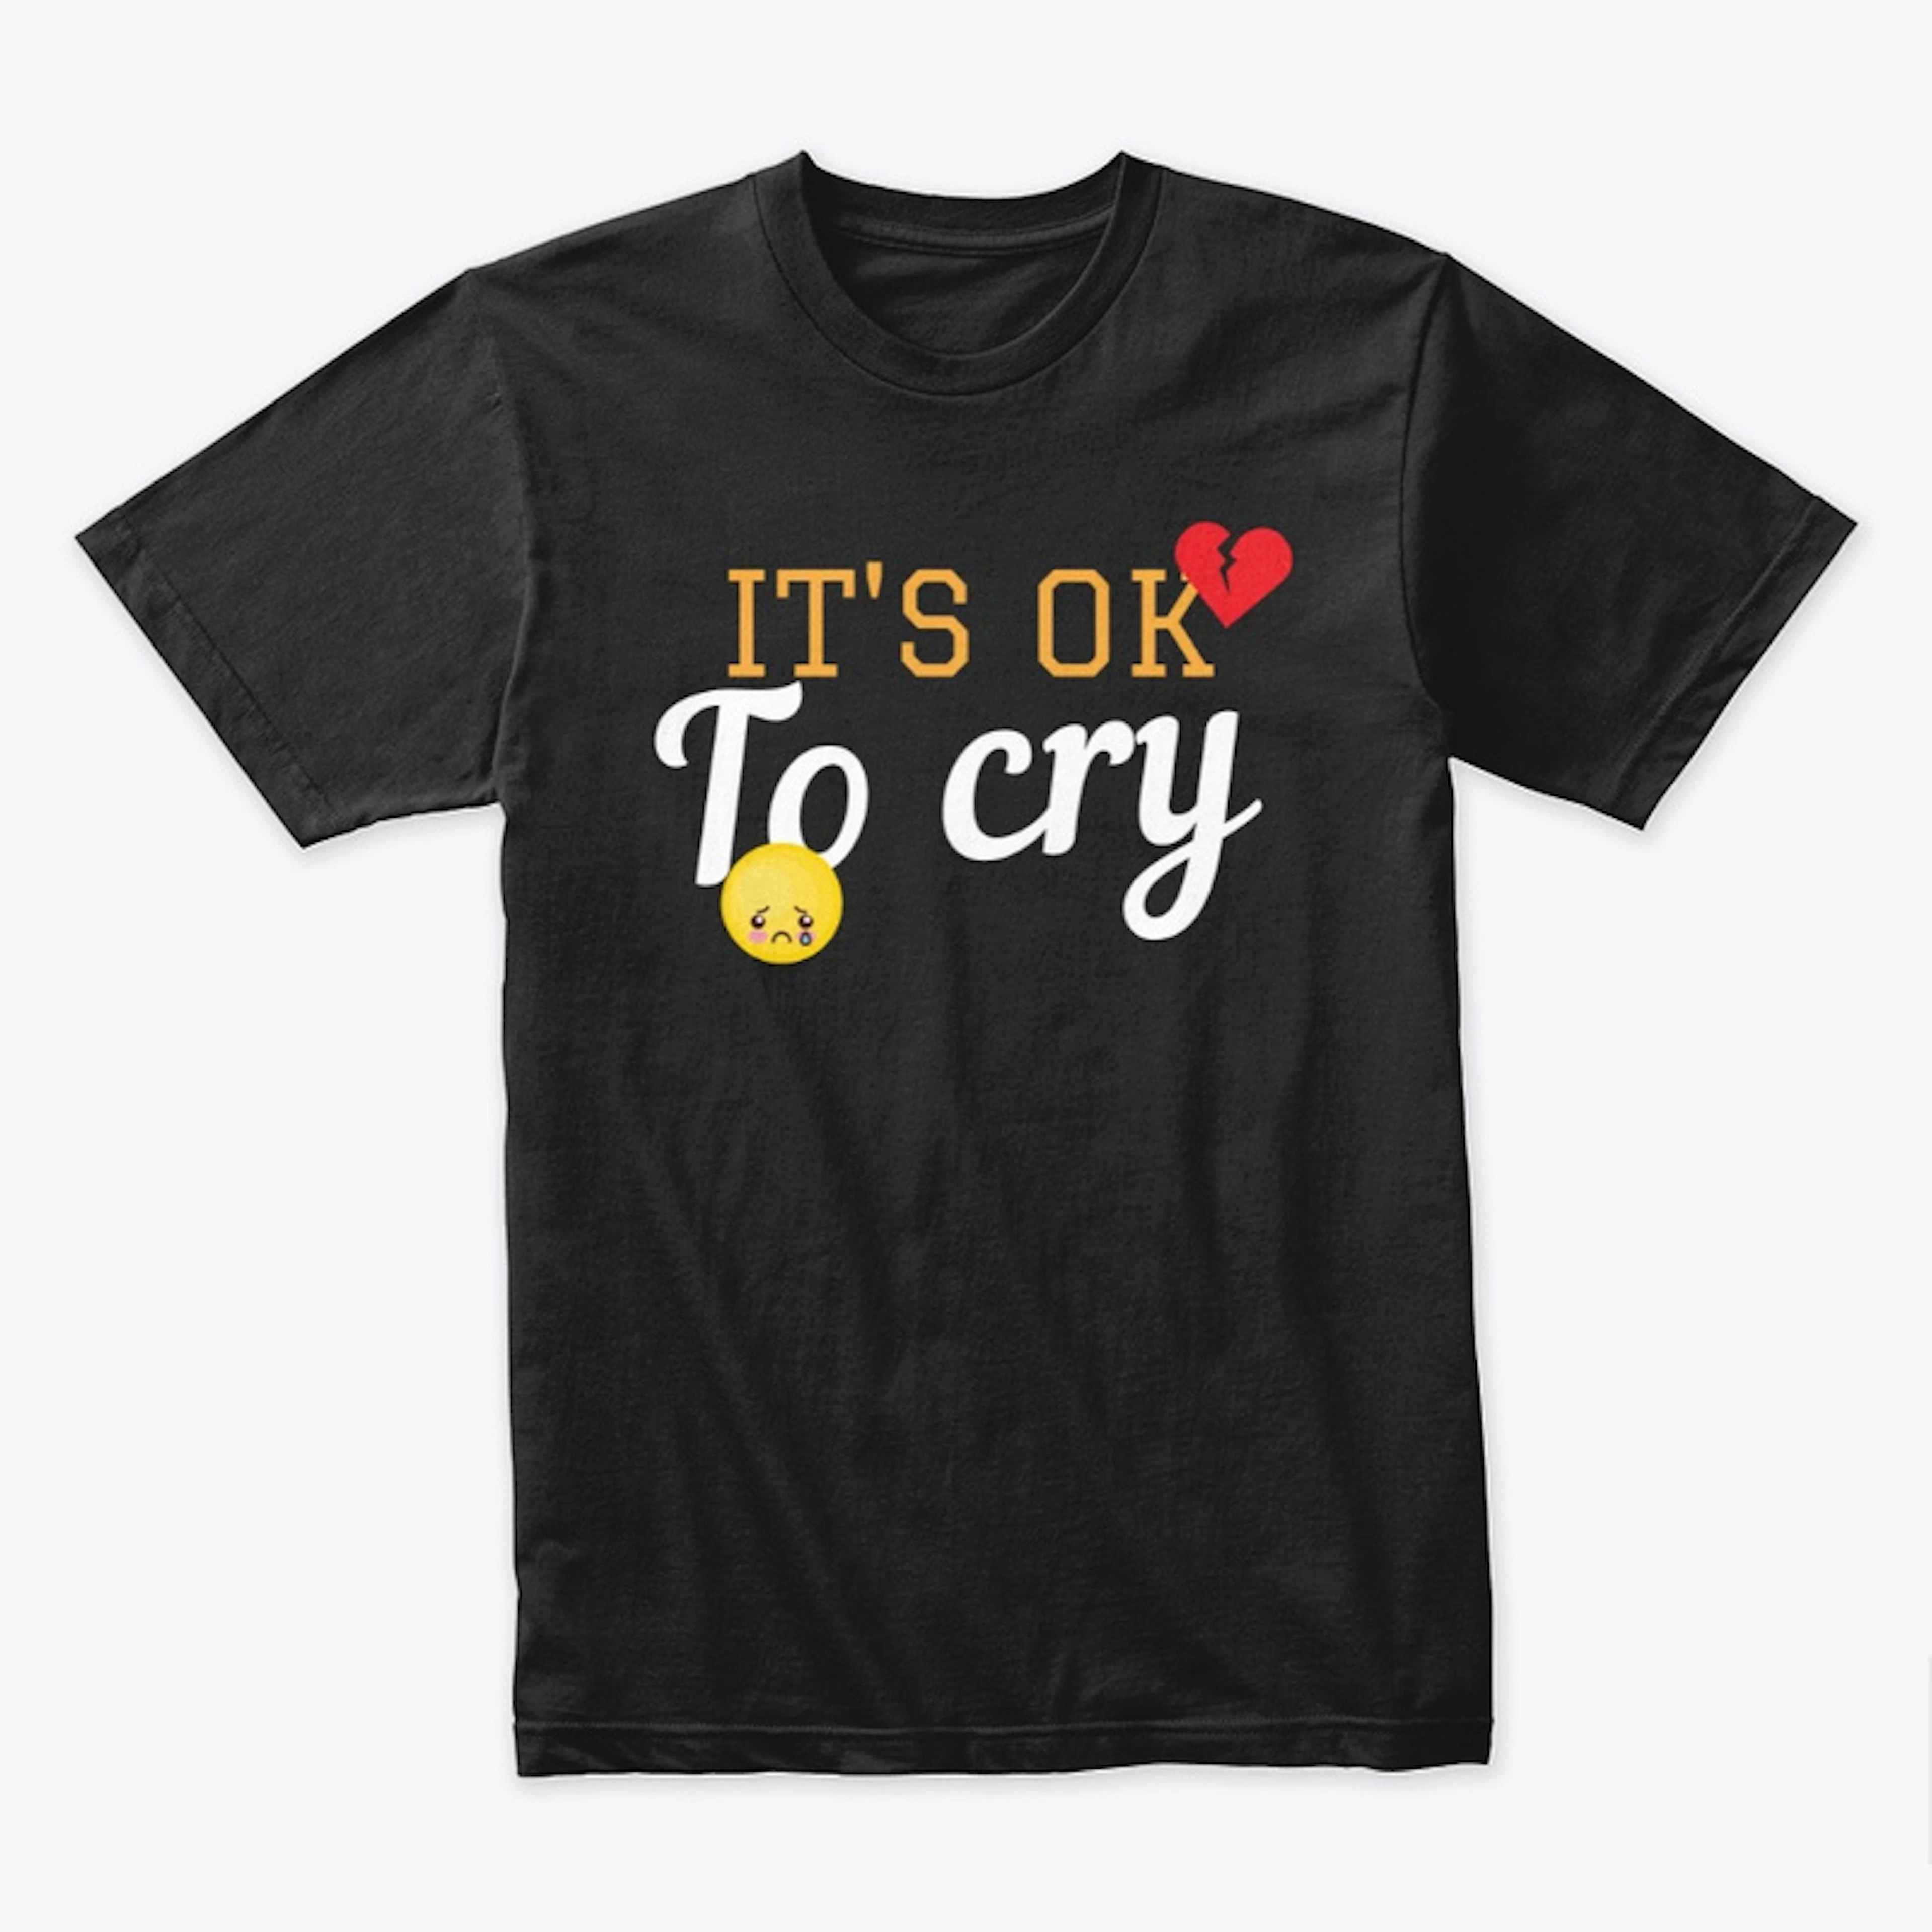 It's ok to cry Tee